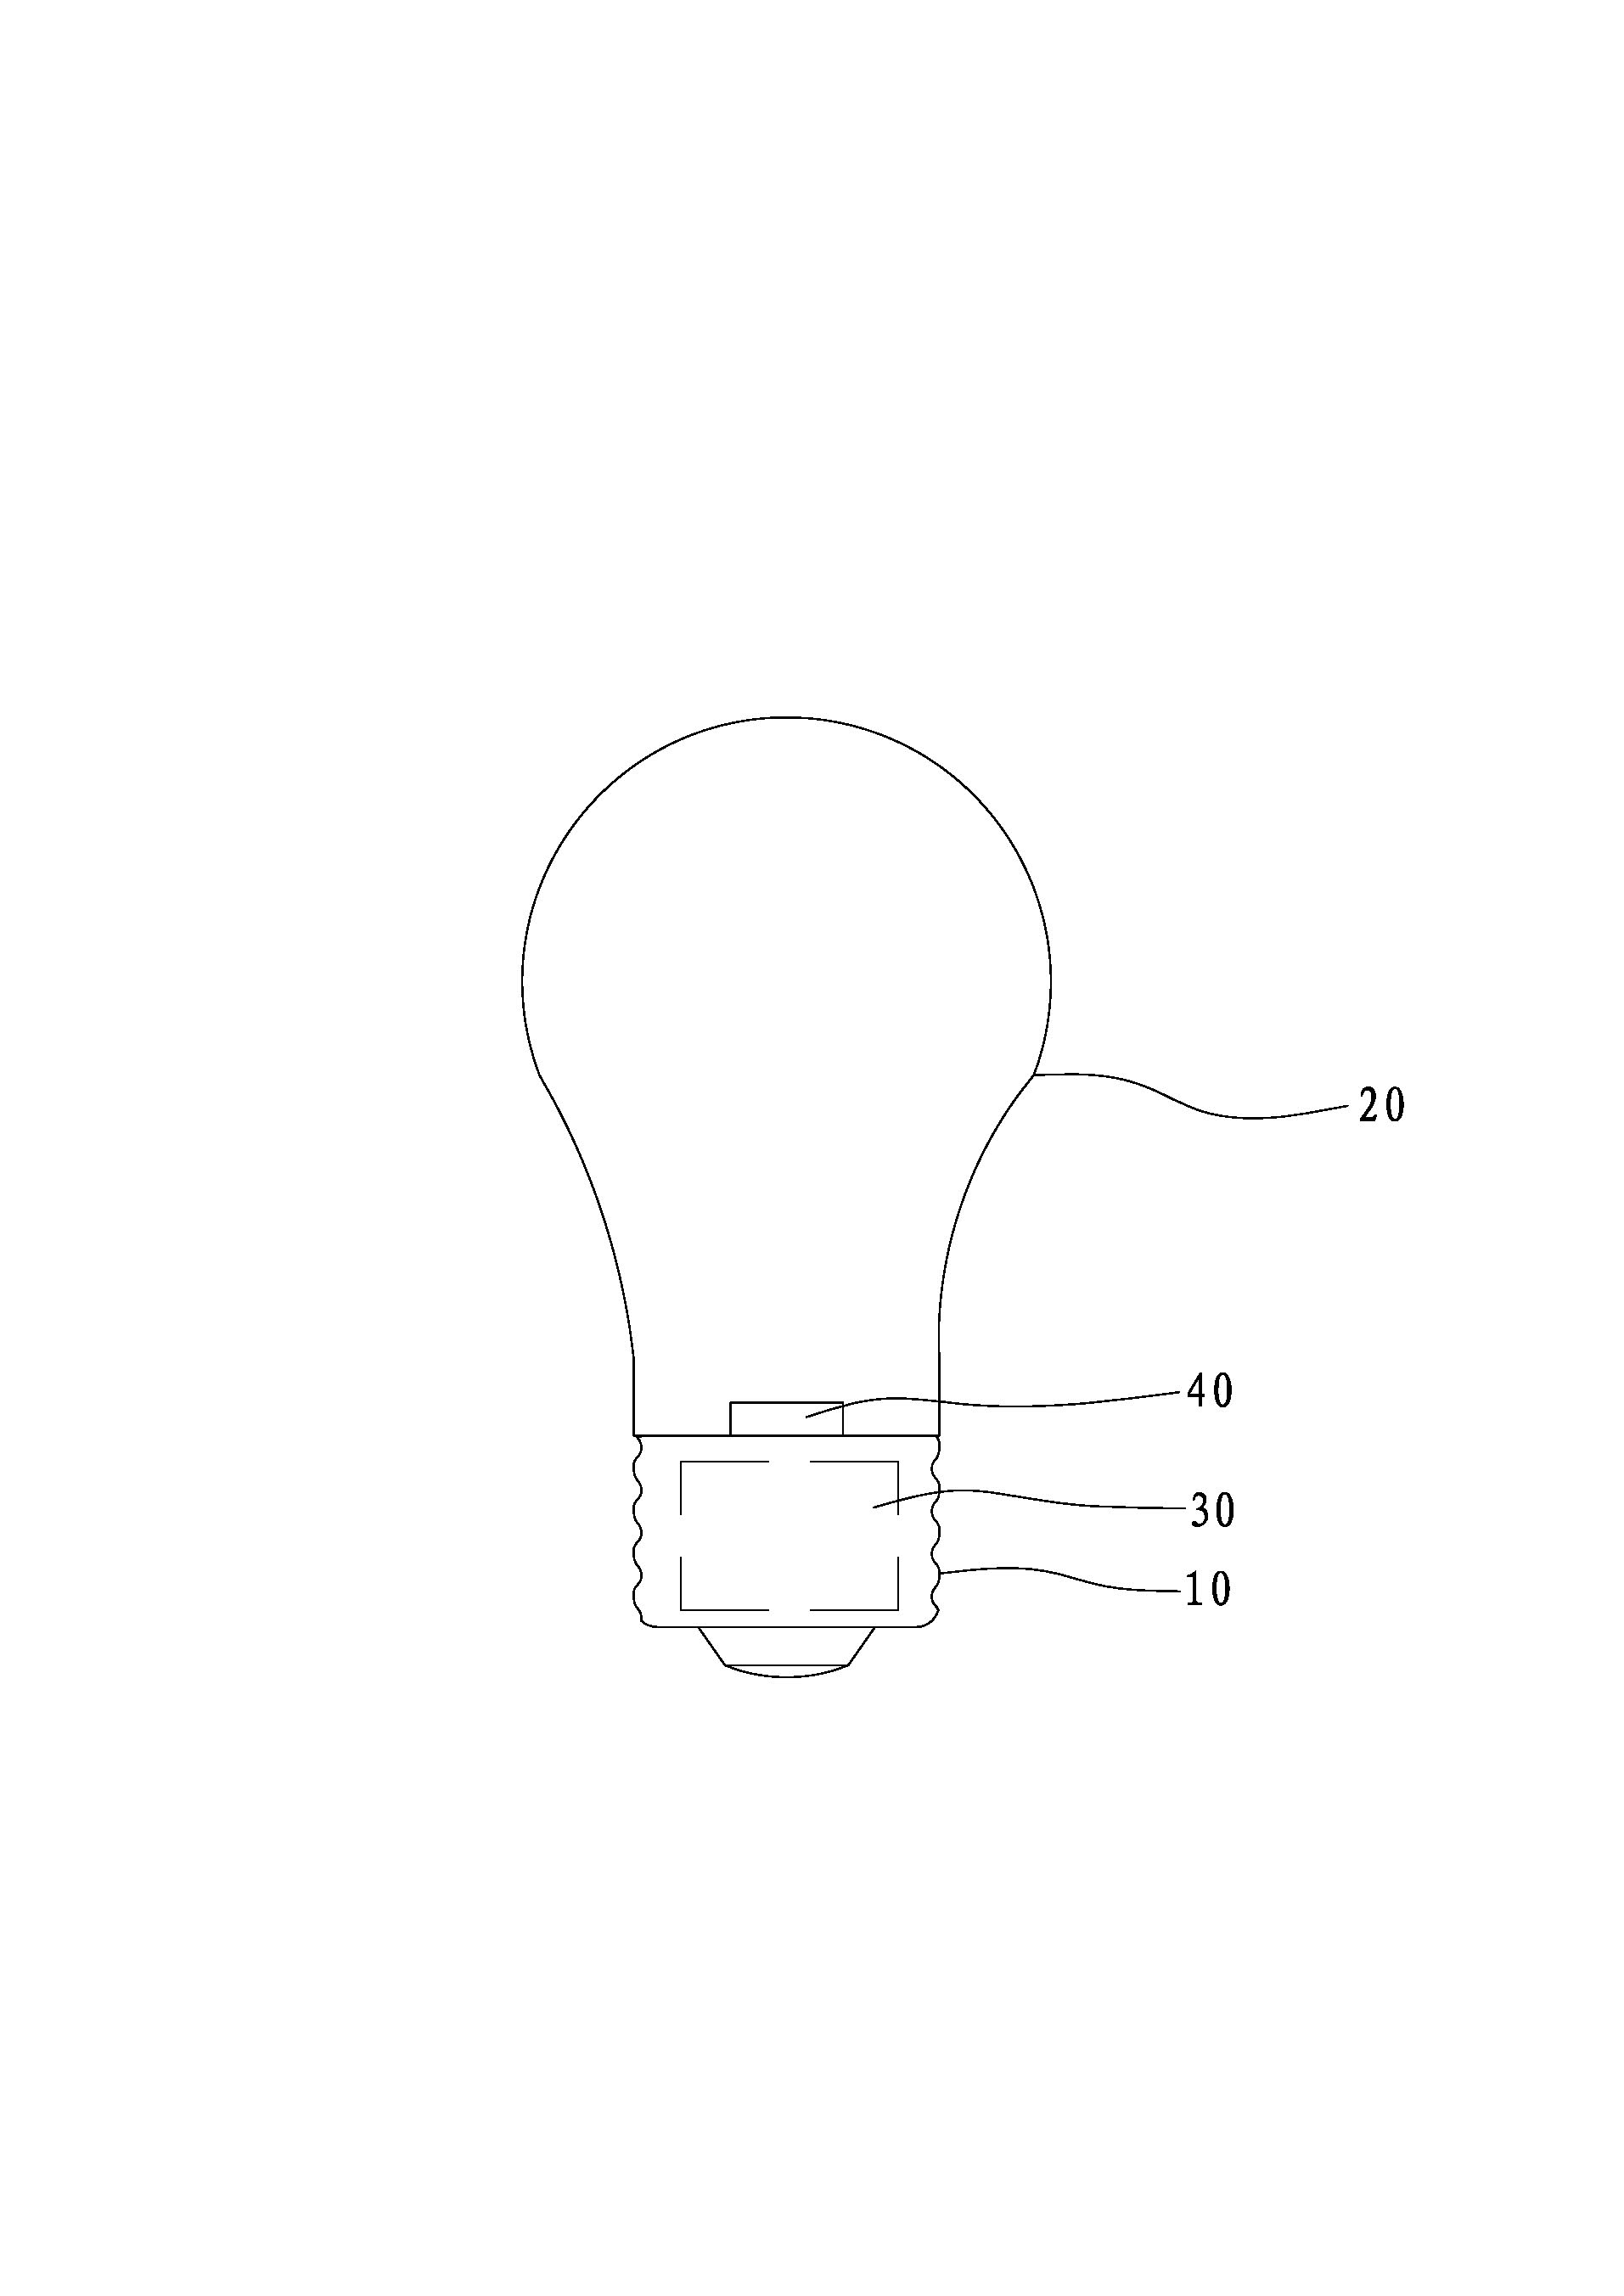 LED (light-emitting diode) lamp with radiating function